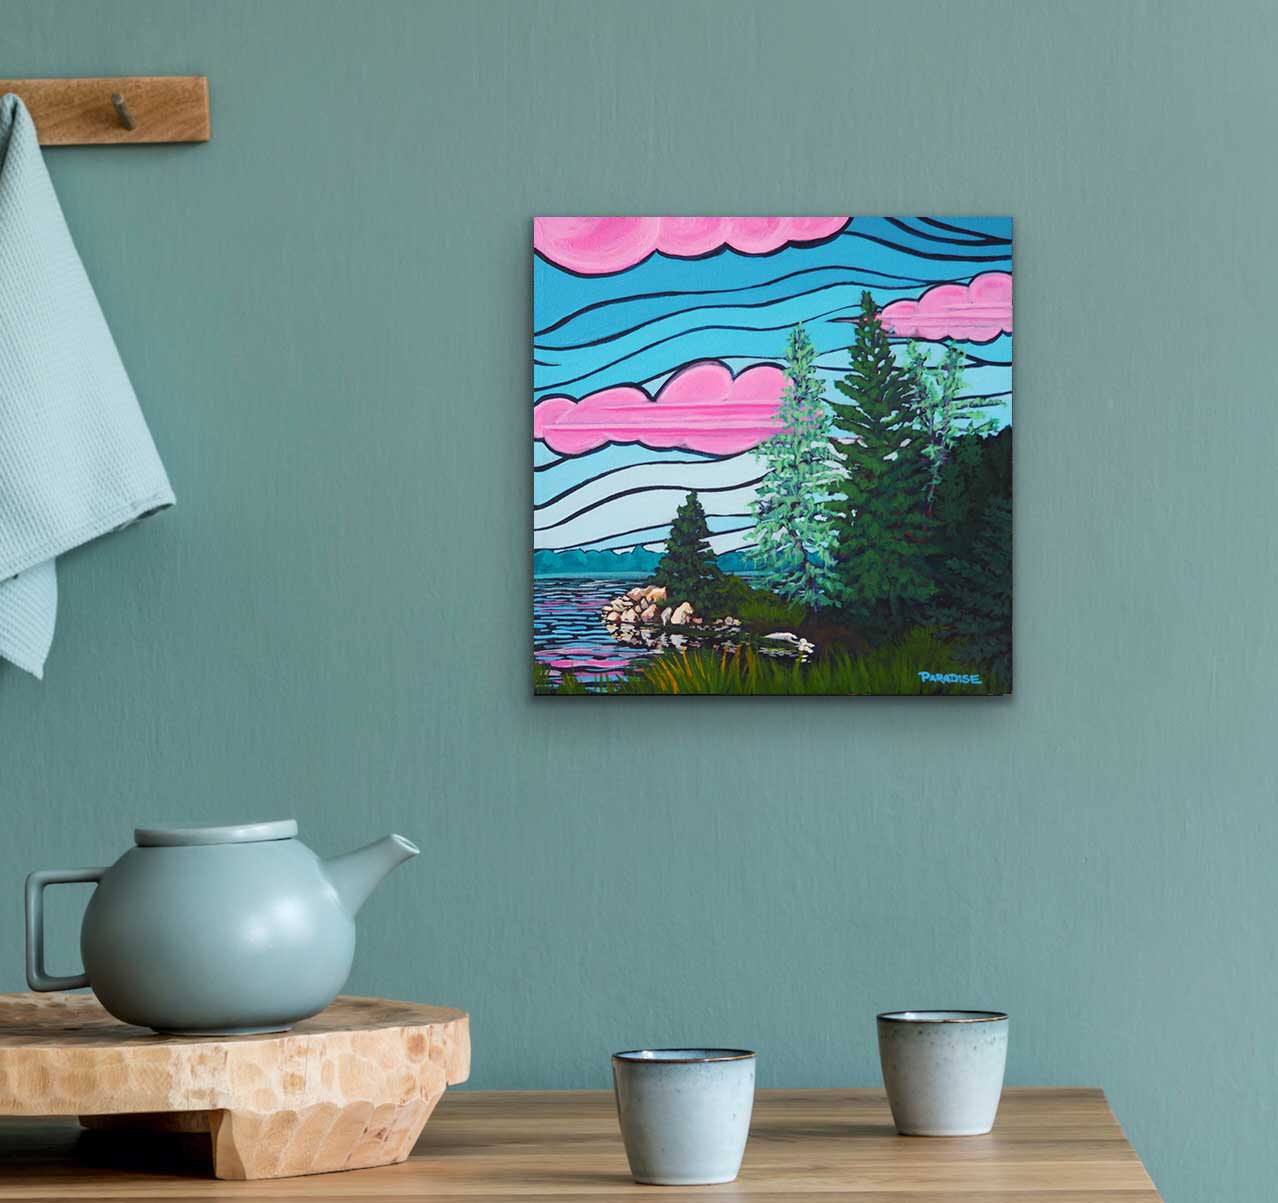 Visitors can be treated to majestic sights as they journey down the bewitching Lighthouse Road, bound for Peggy's Cove. From the shimmering waters to the sky made of blue and clouds of pink, everything is possible. Painted by professional Canadian landscape artist. visual art ready to hang on your wall.